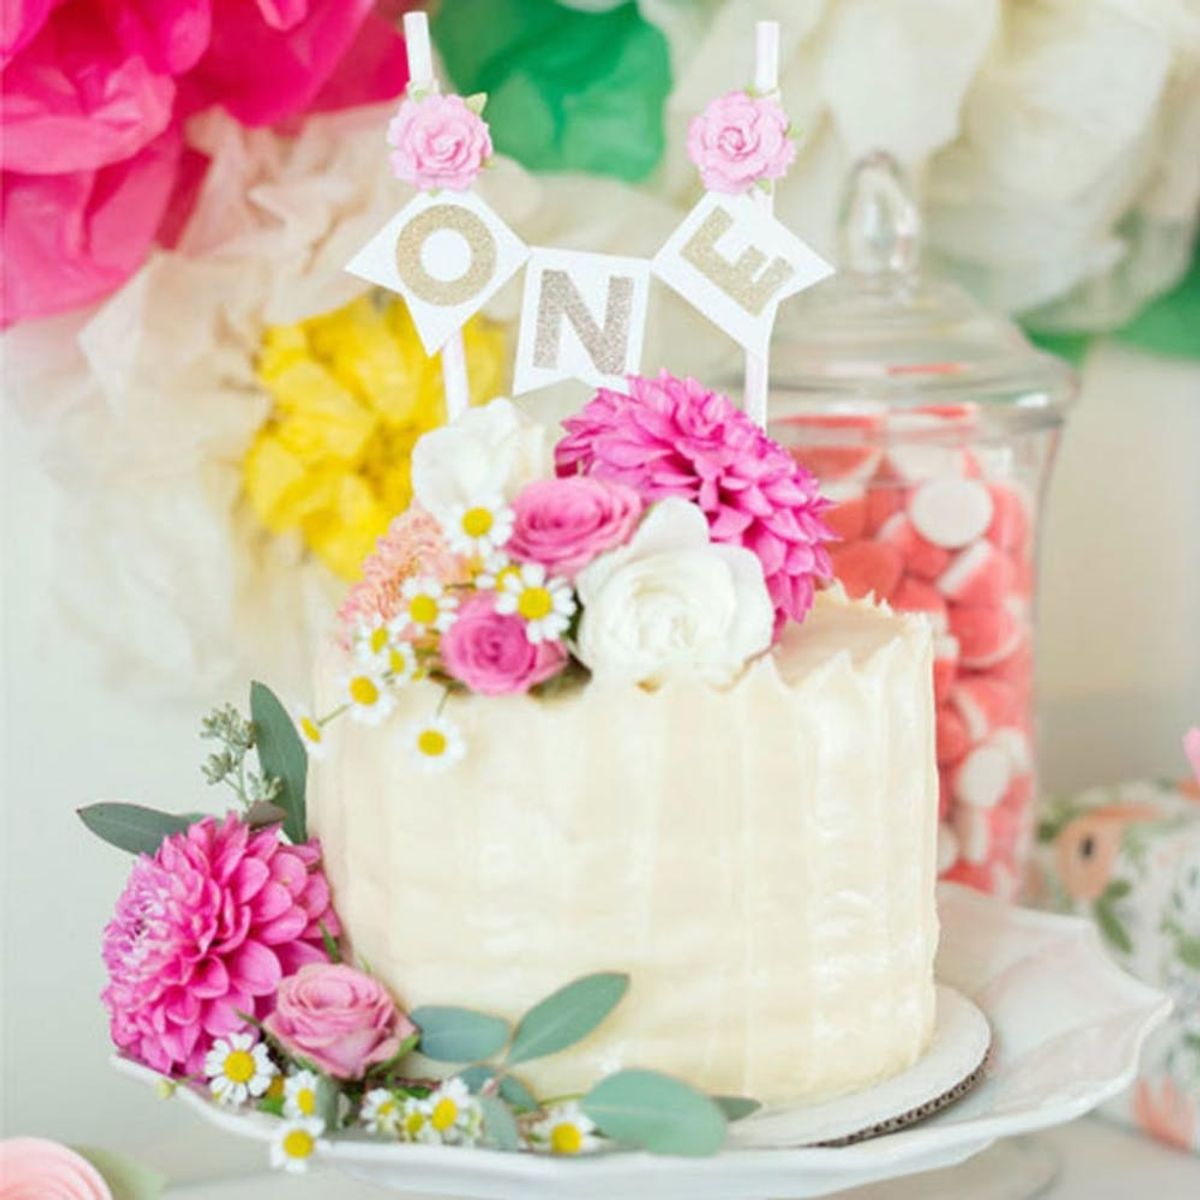 12 Ways to Throw a Boho-Chic Kids Party for Your Mini-Me